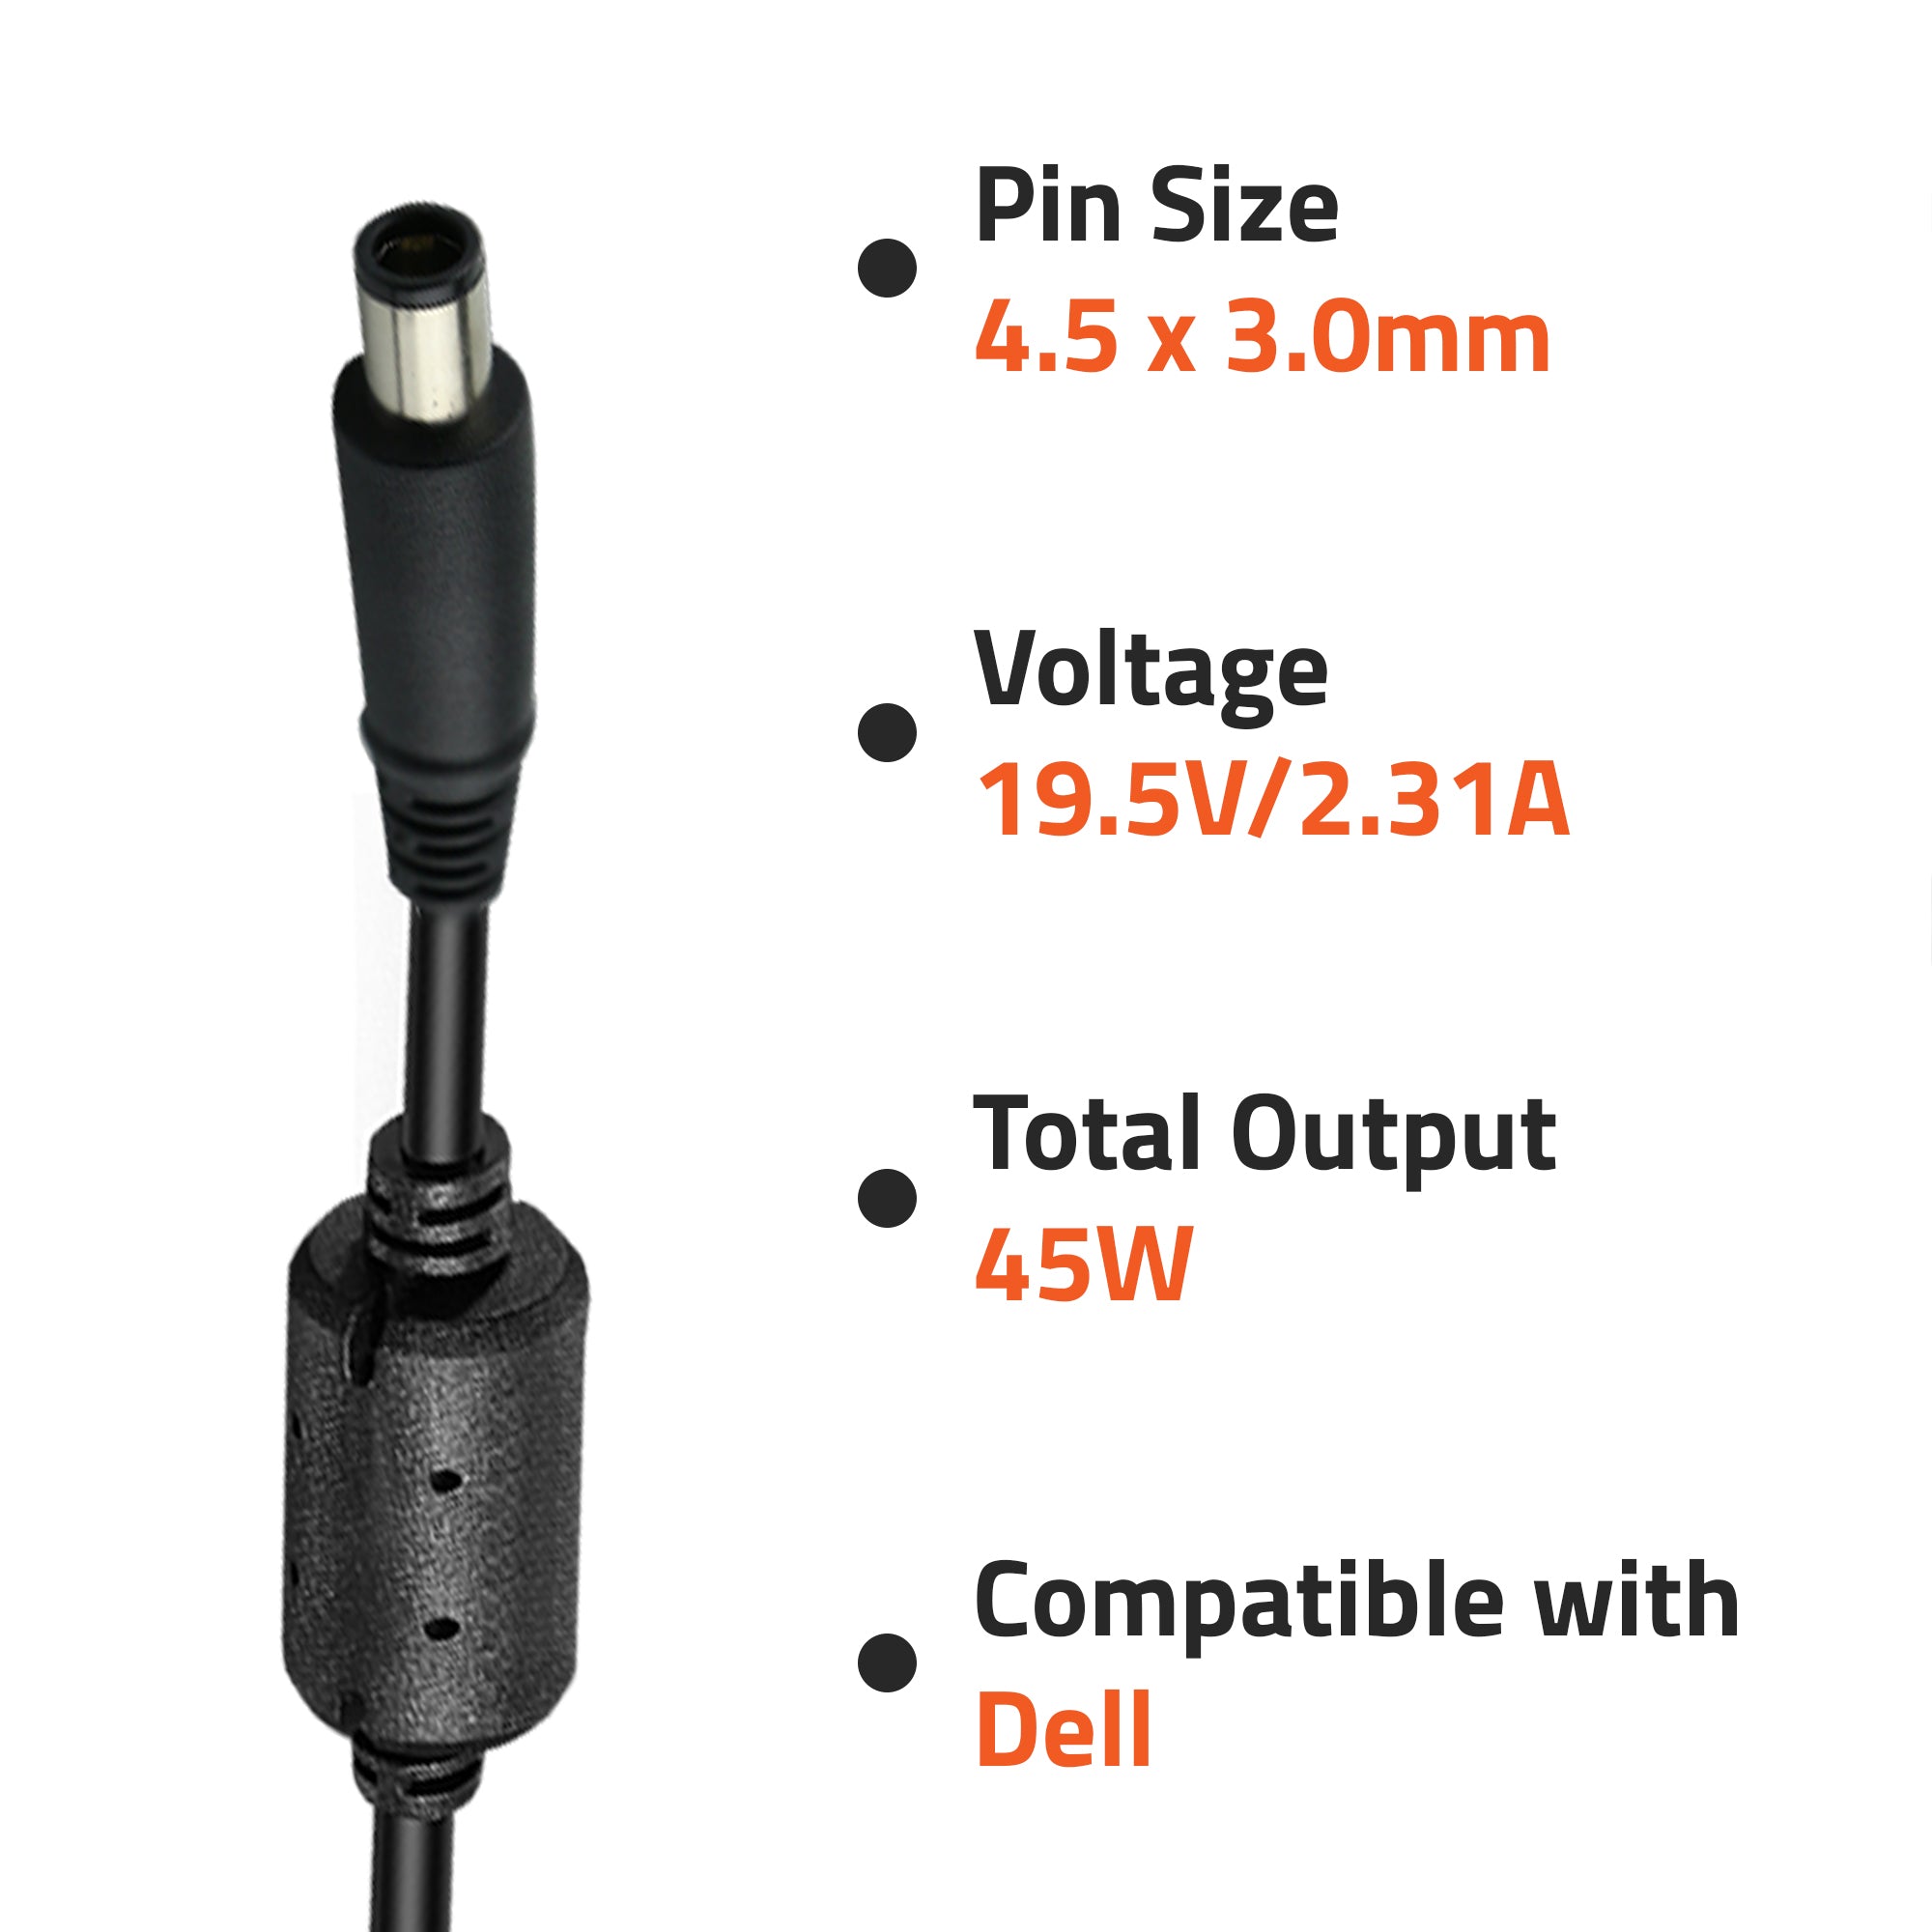 A0402 45Watt Laptop Adapter Compatible with Dell Laptops (19.5V/2.31A ,Pin : 4.5 x 3.0mm)